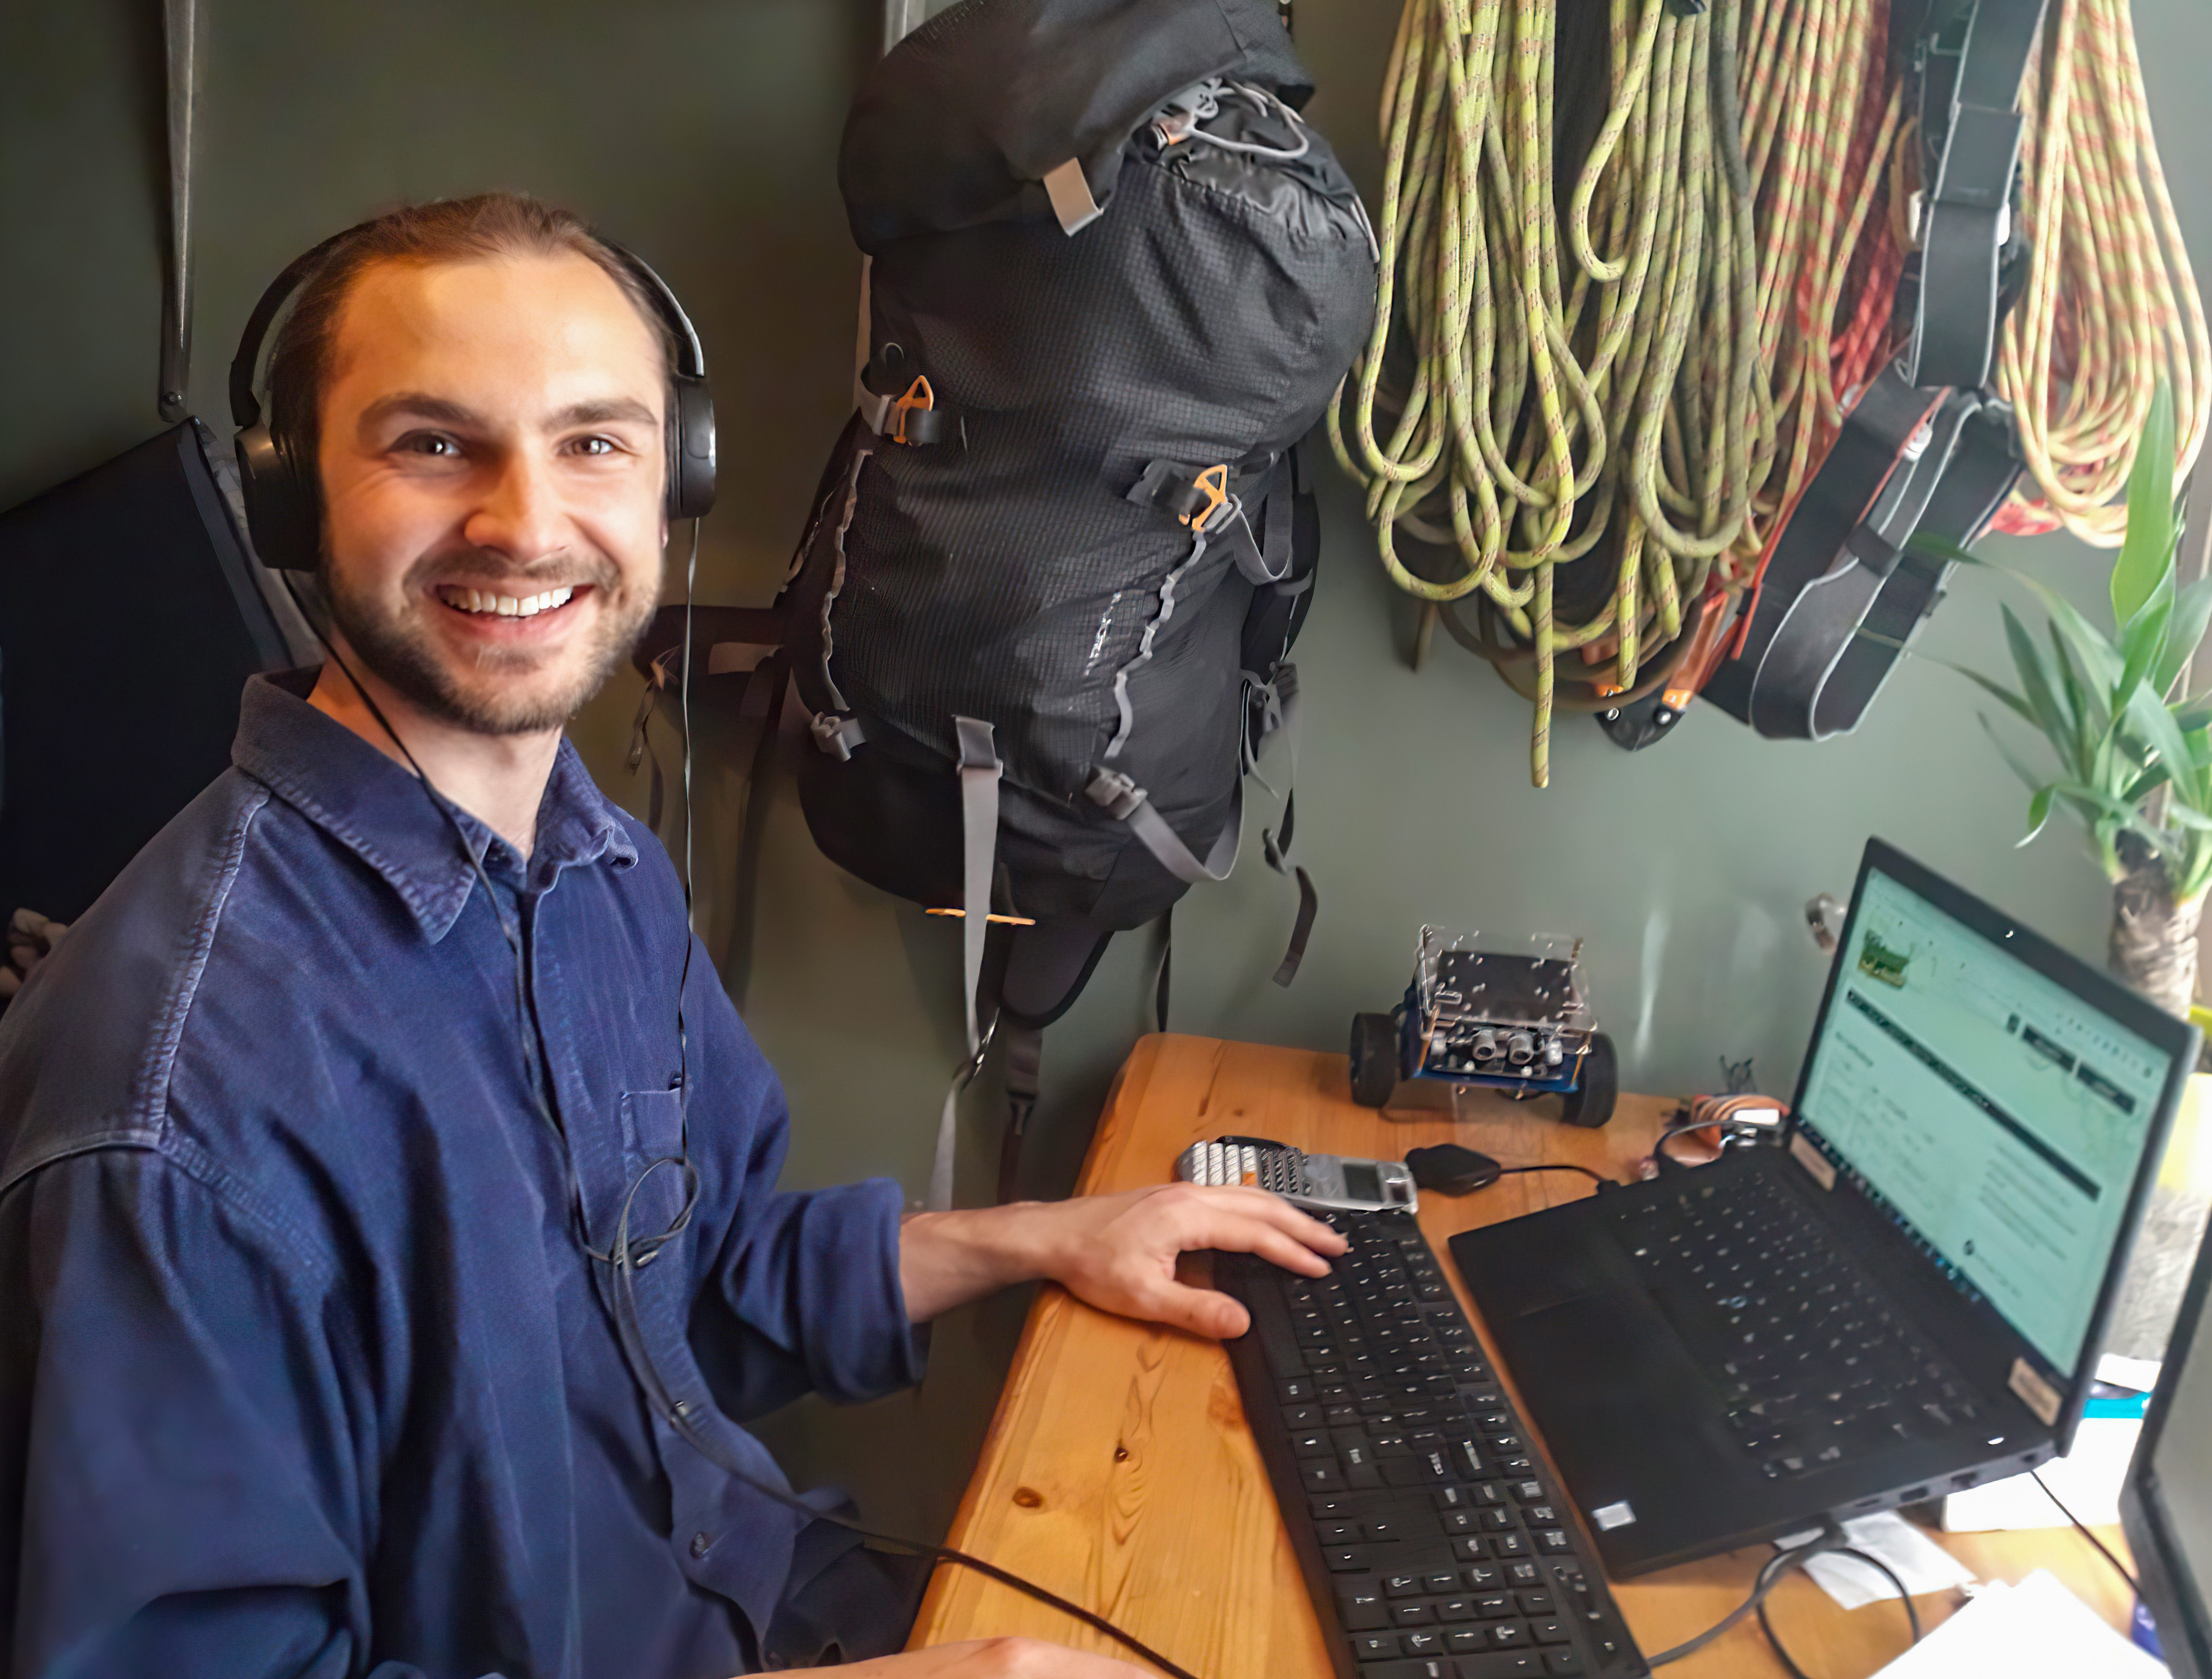 man with headphones on at laptop, smiling to the camera